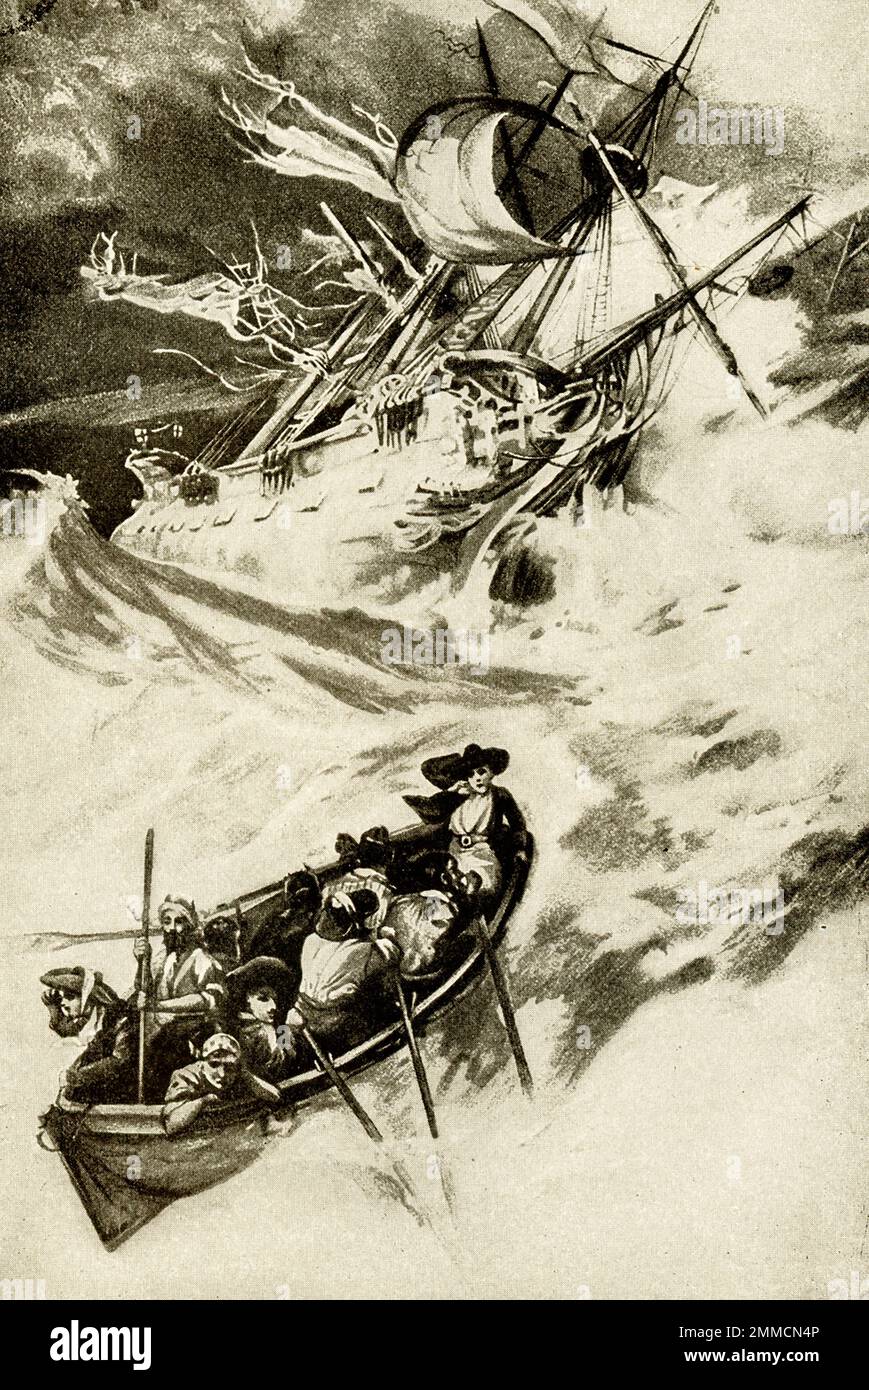 The 1917 caption reads: “Escape from the shipwreck – Robinson Crusoe.” Robinson Crusoe is a novel written by the English novelist Daniel Defoe and published in 1719. A fictional autobiography,  it tells the tale of an English castaway named  Robinson Crusoe (seen here escaping from the shipwreck) who spent 28 years on a remote tropical island near Venezuela before he was rescued. Stock Photo